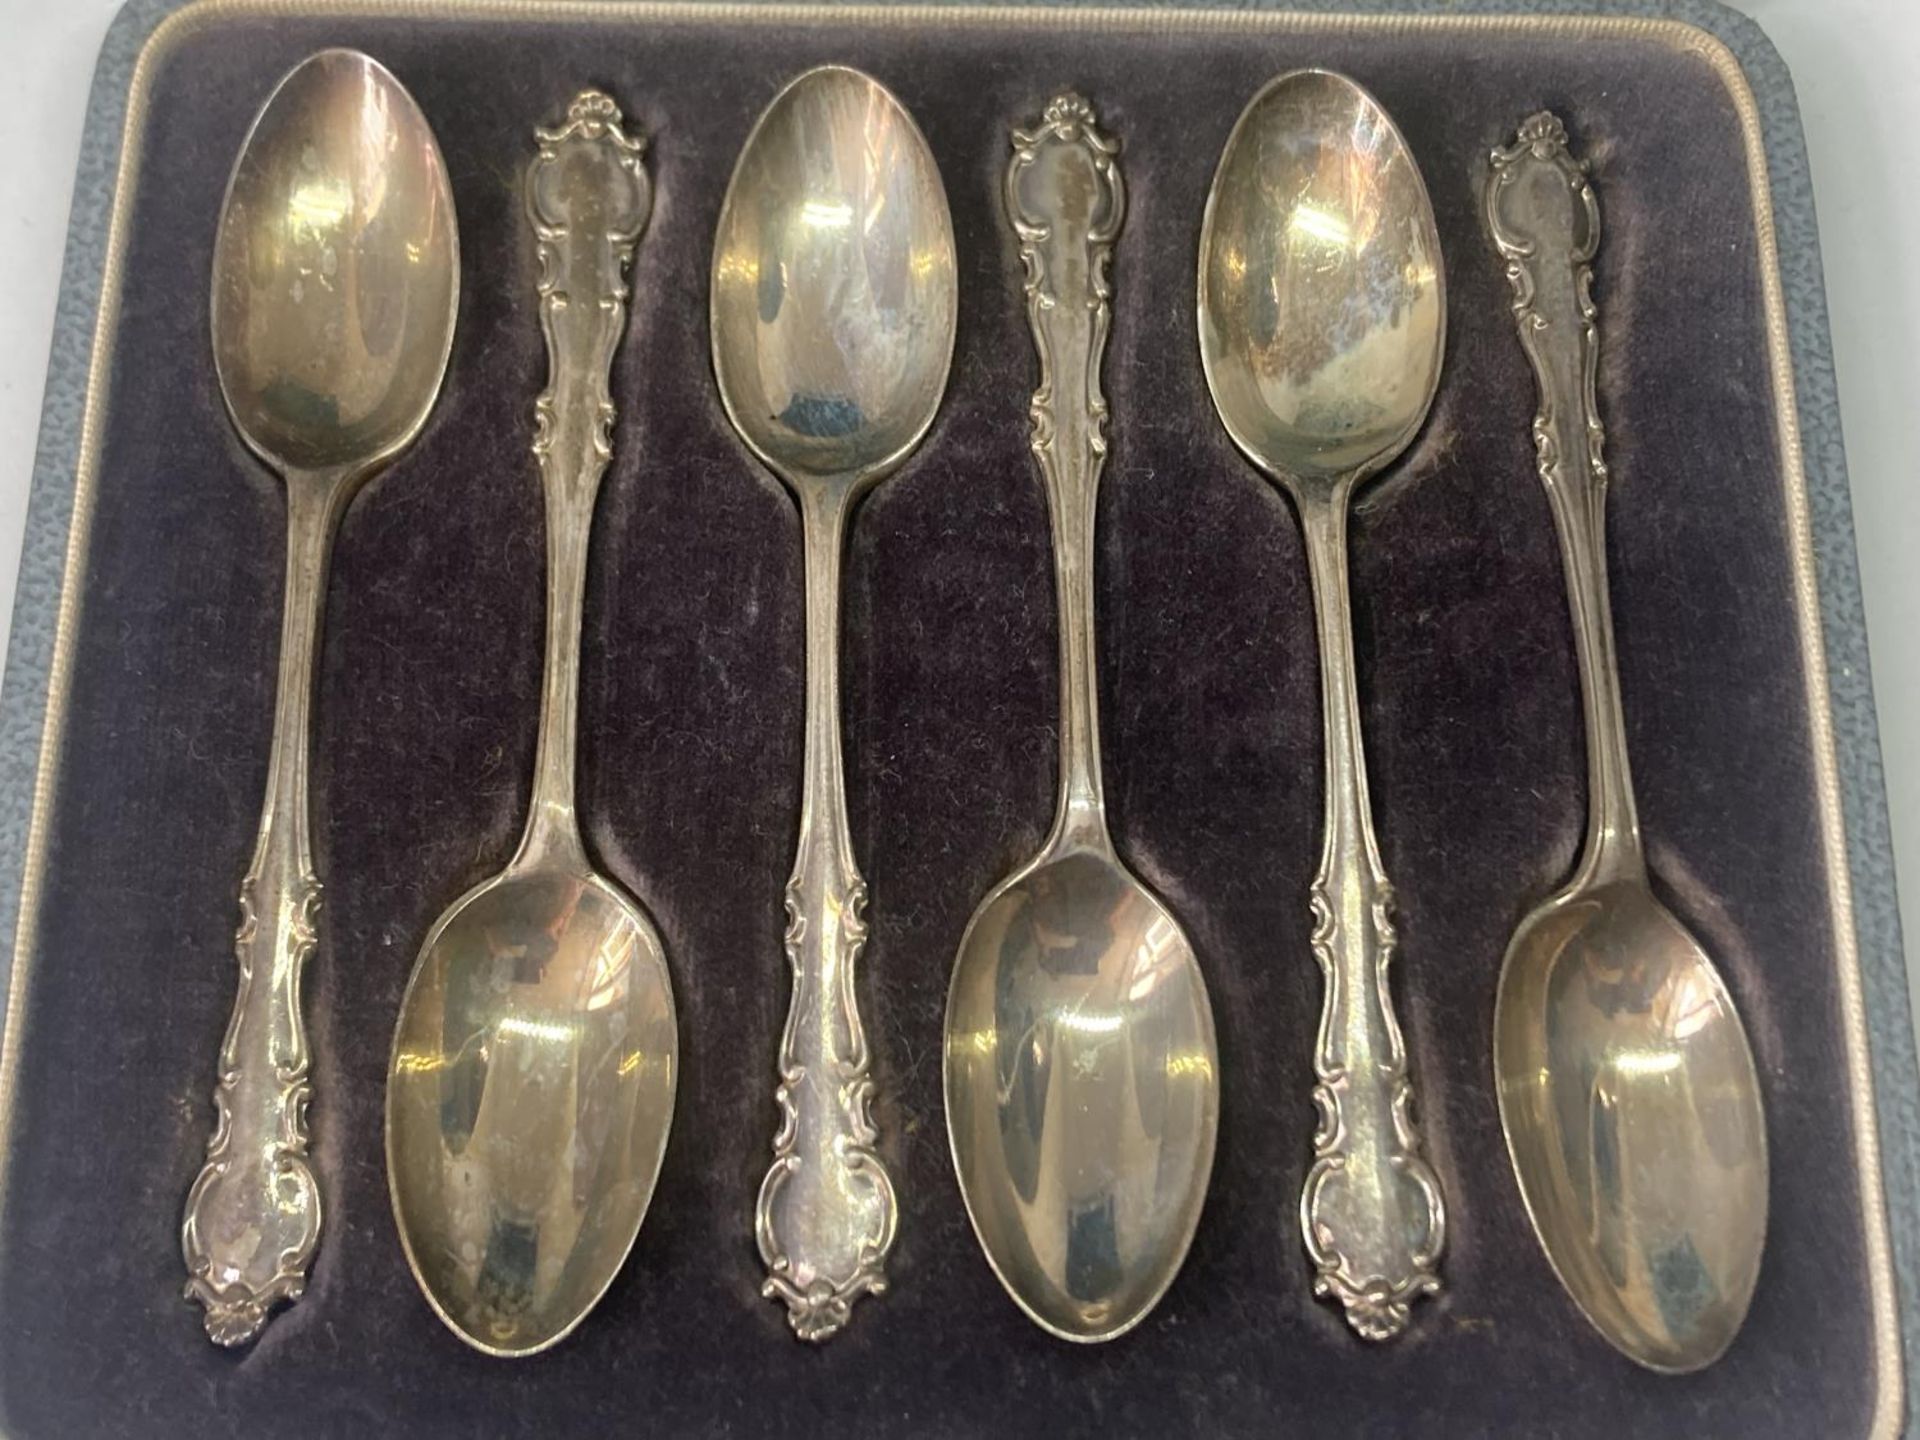 A SET OF SIX HALLMARKED LONDON TEASPOONS IN A PRESENTATION BOX - Image 3 of 8